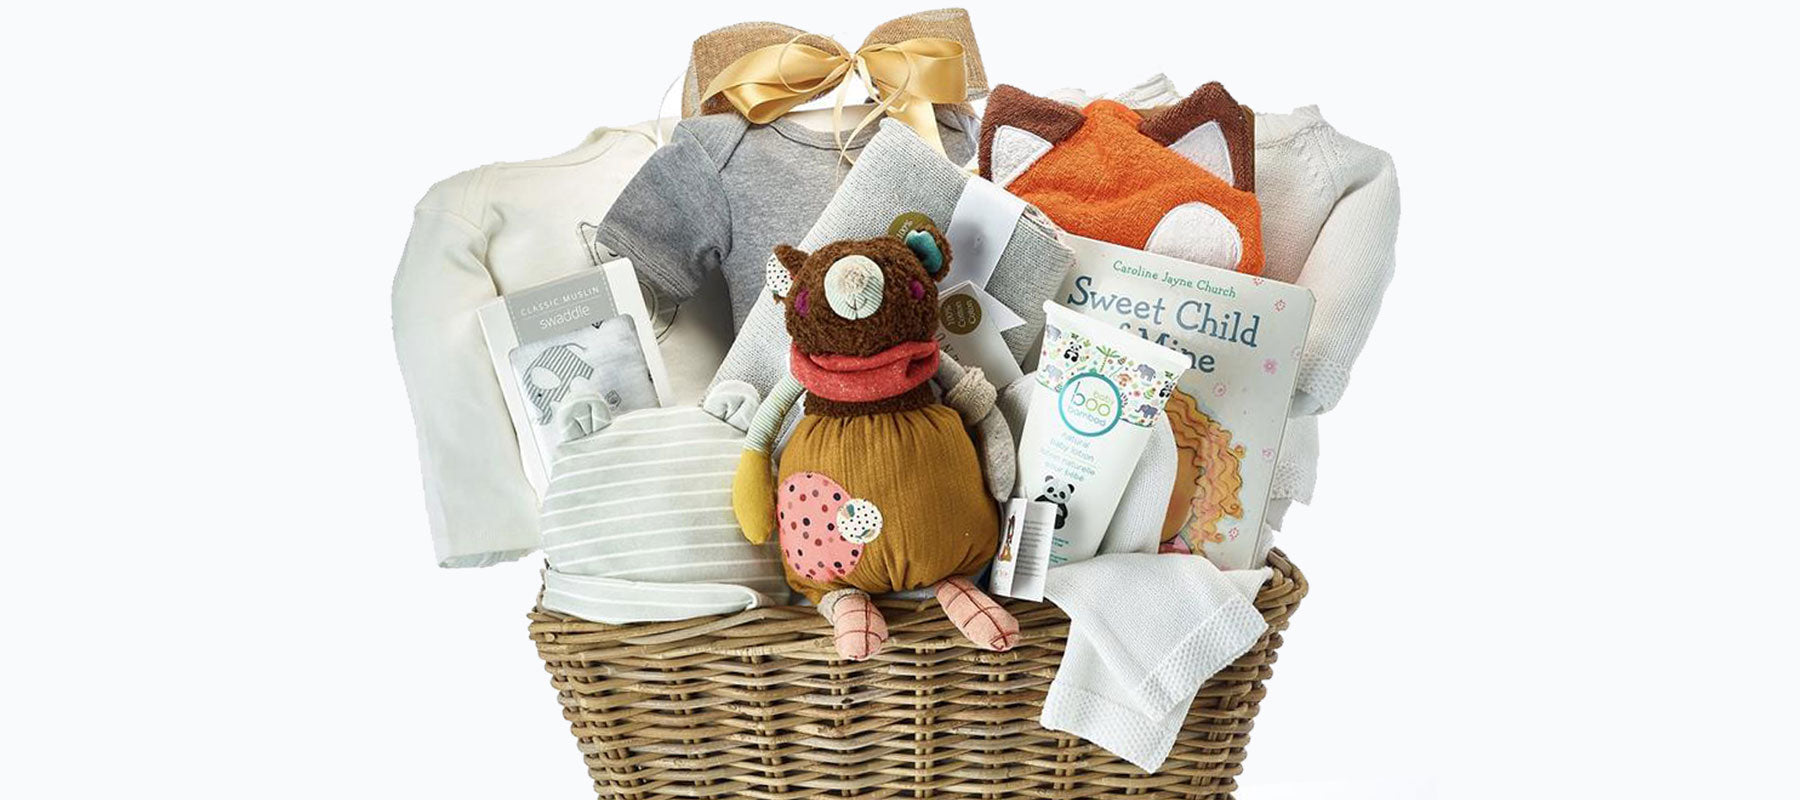 What to bring to a “No Gifts” Baby Shower